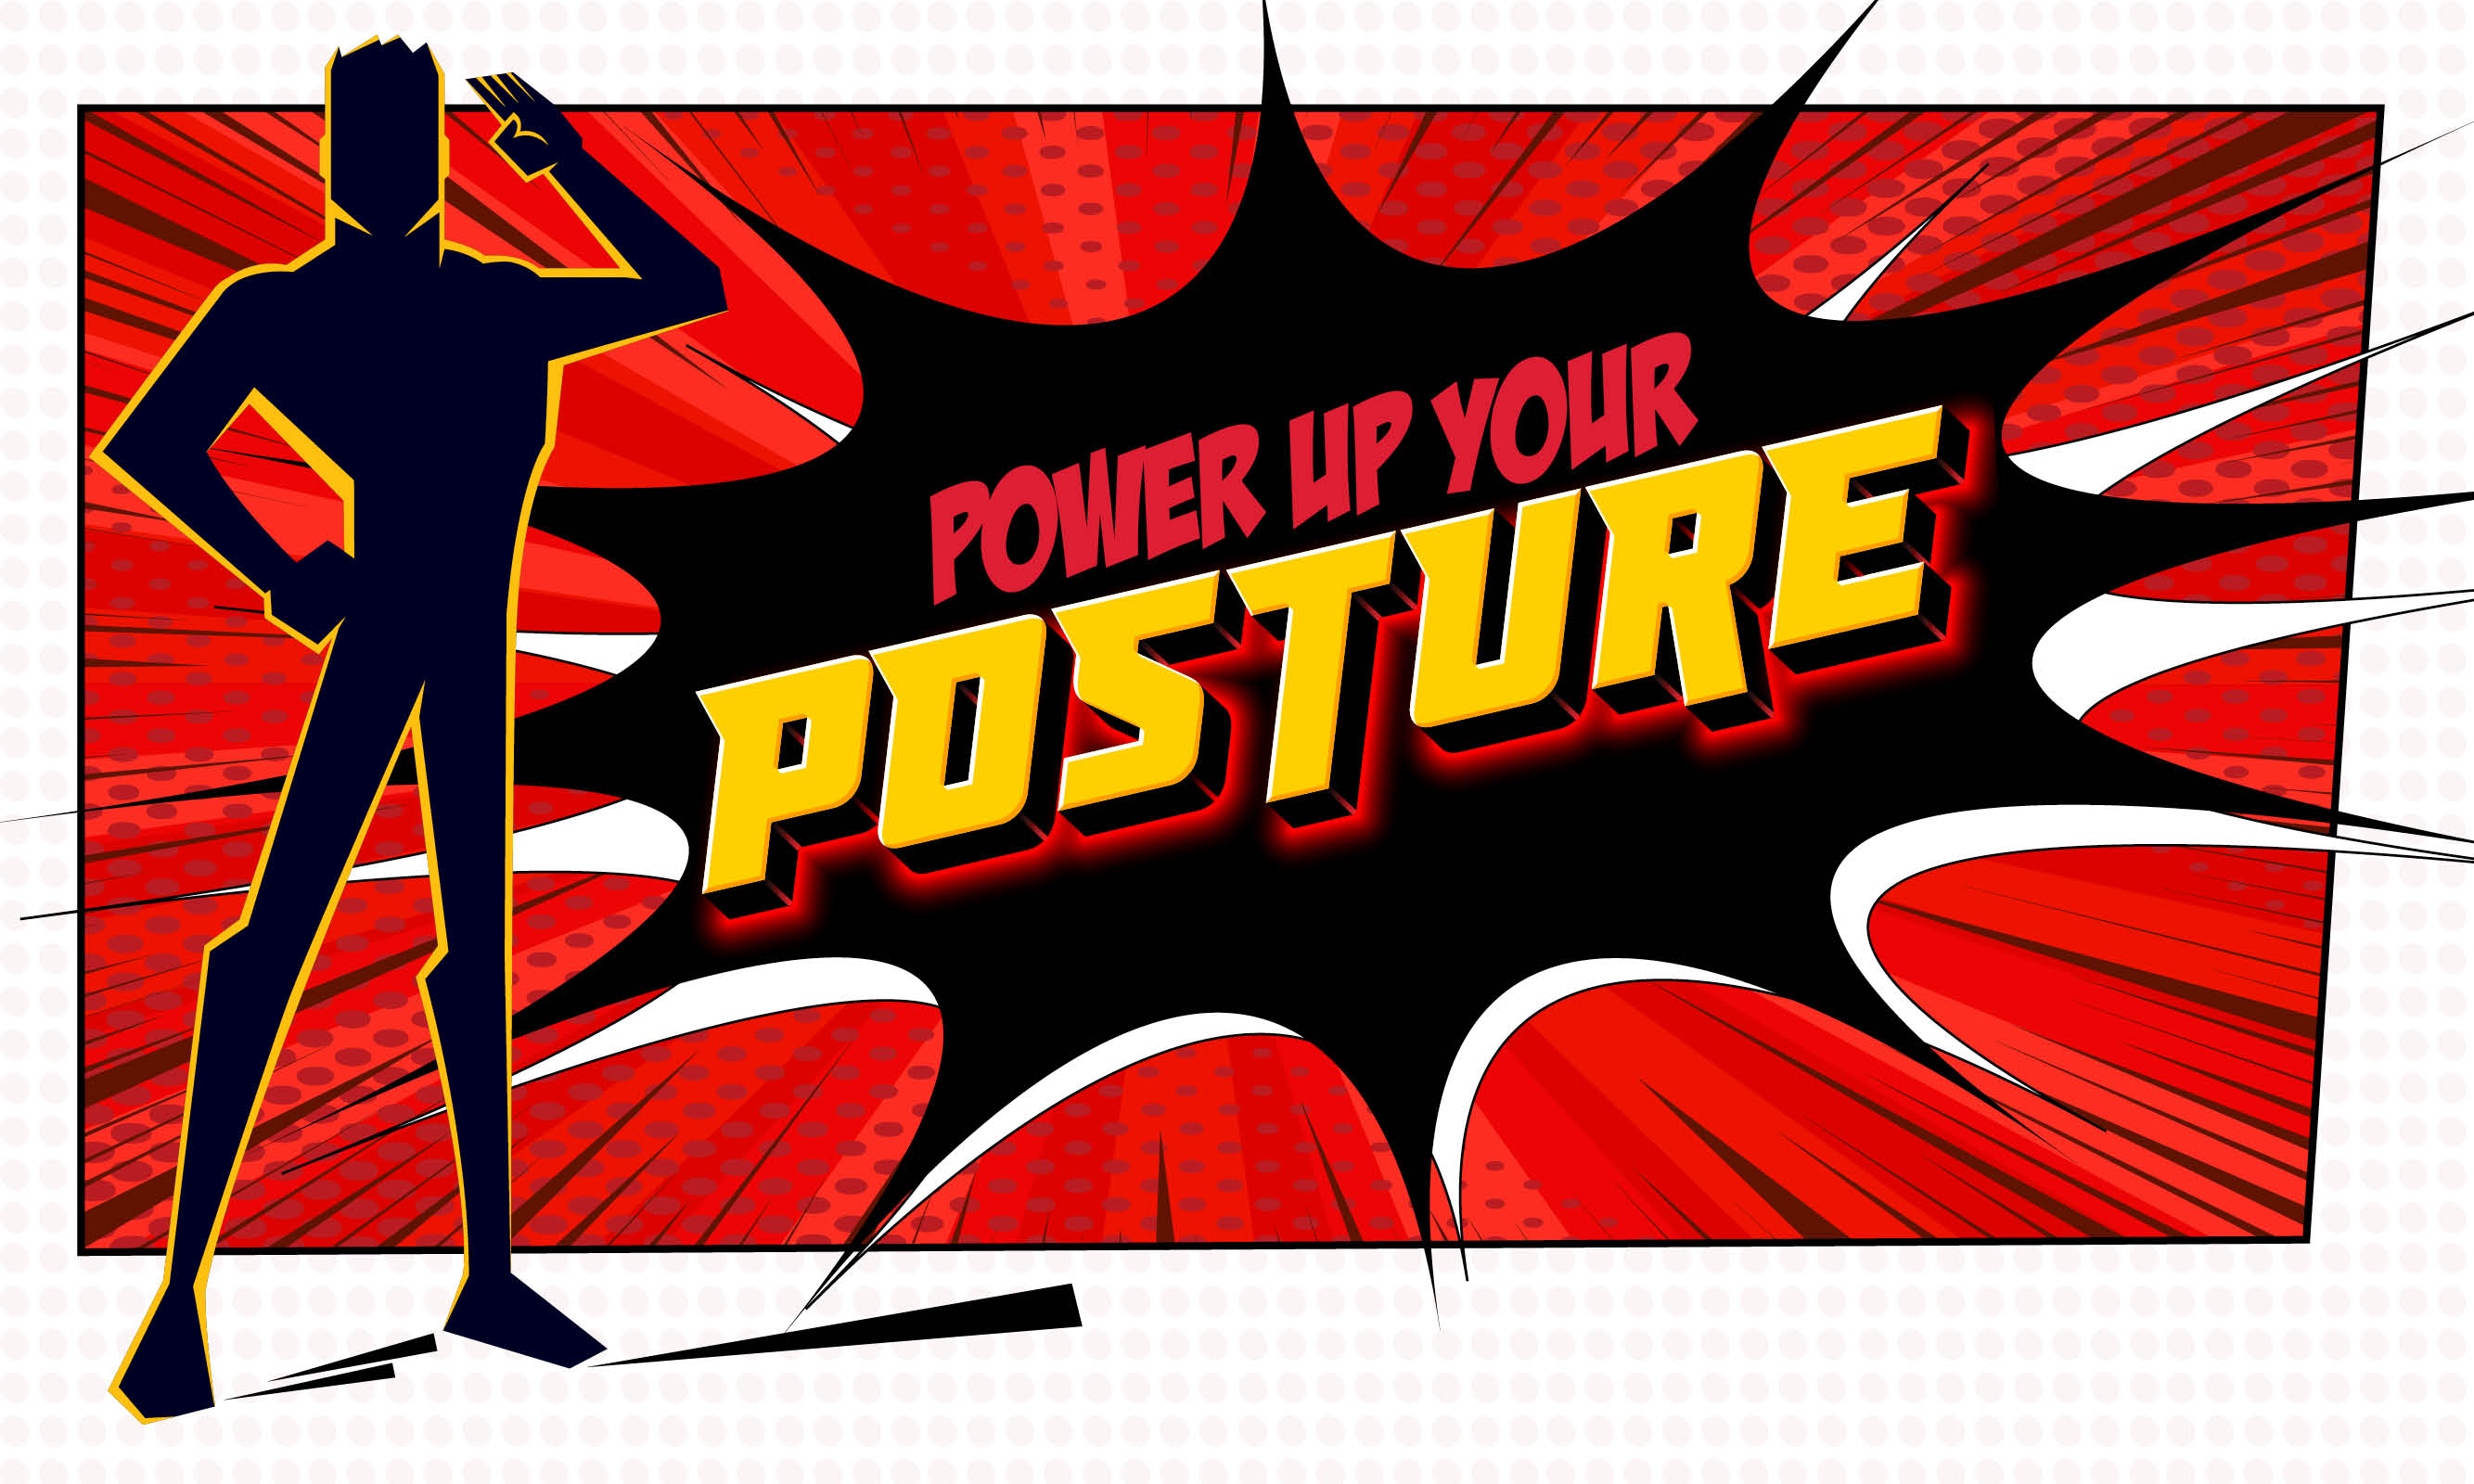 Power up Your Posture graphic